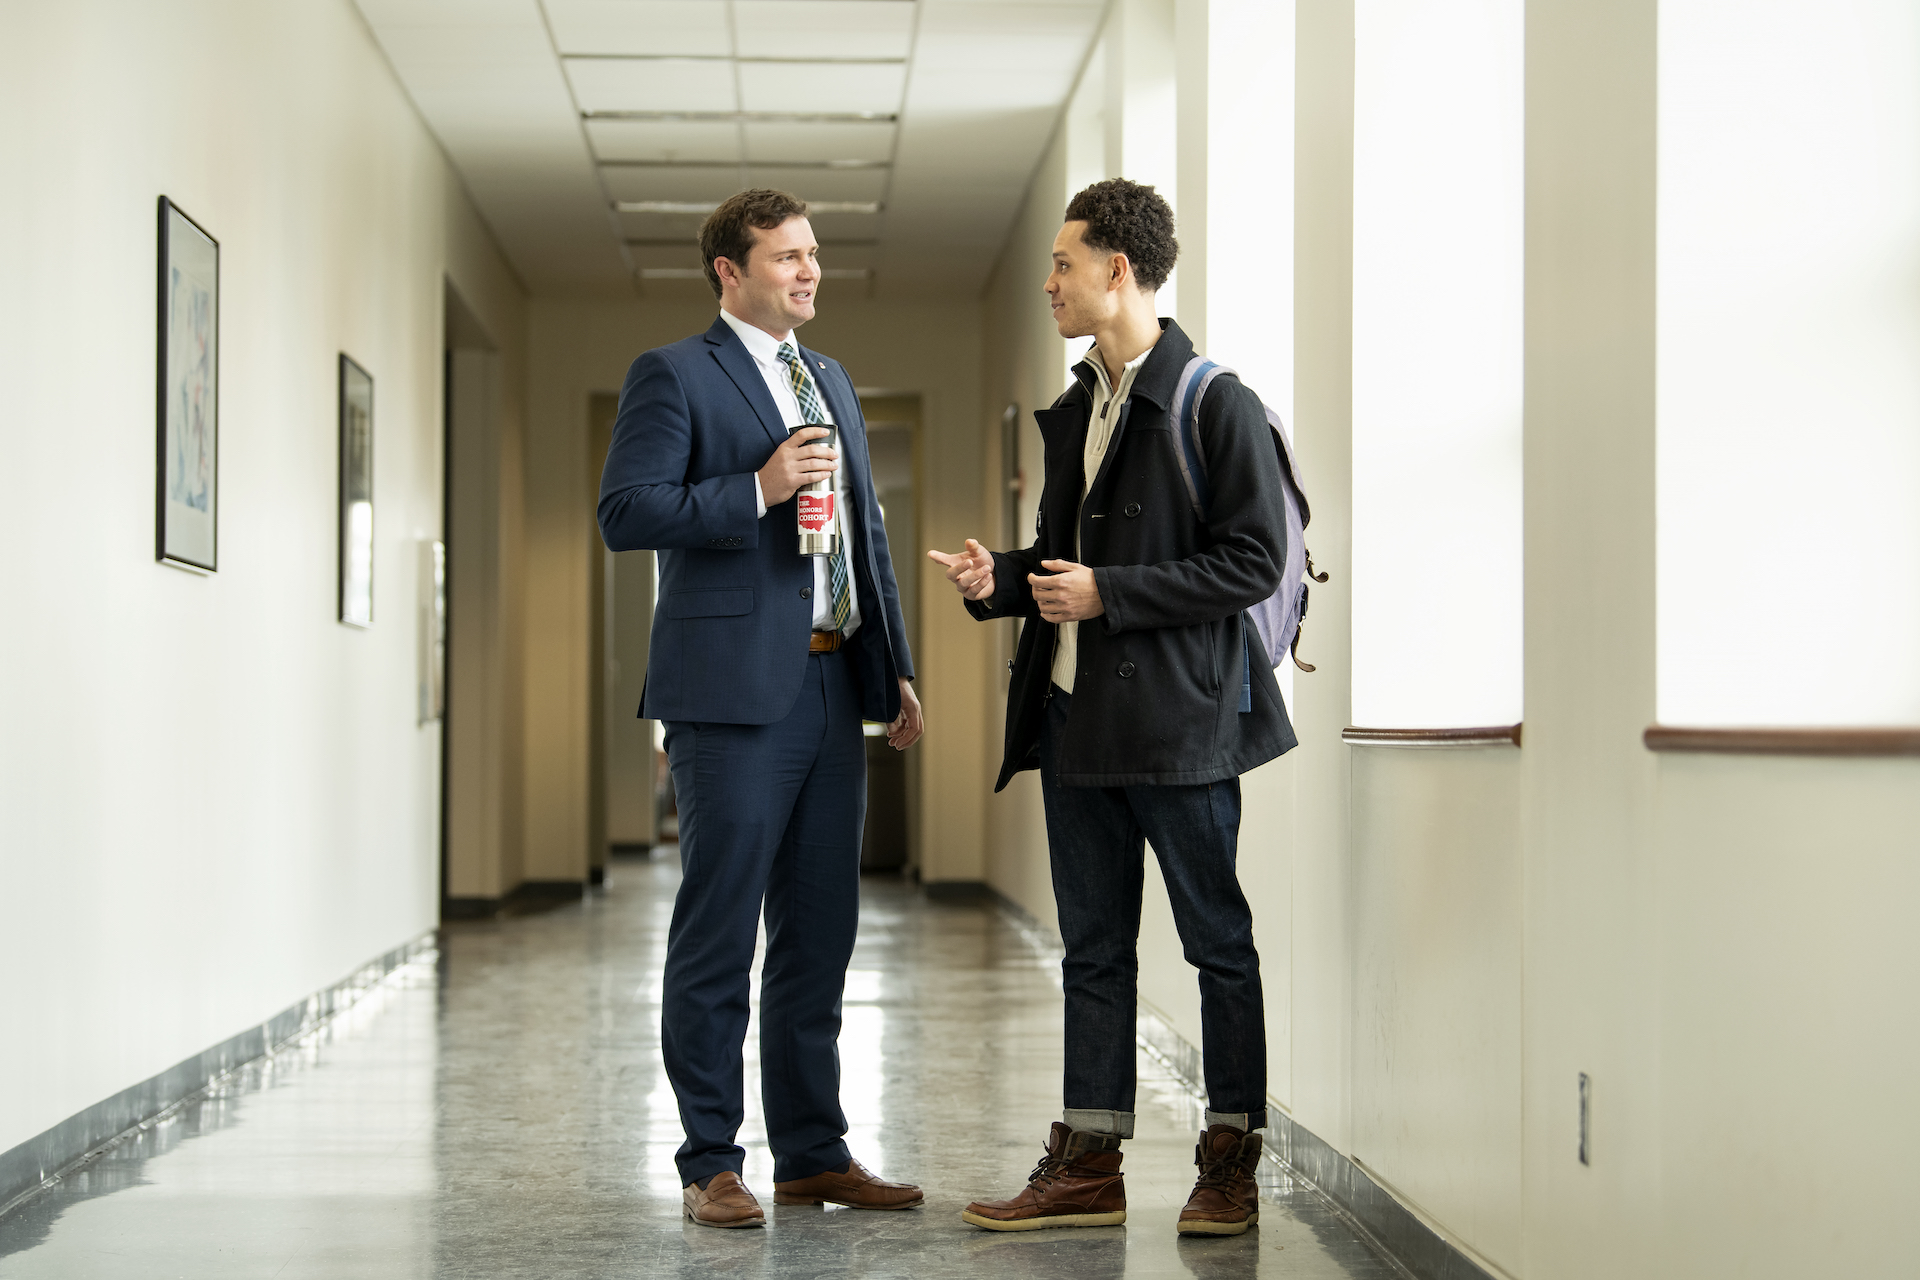 A faculty member speaks with a student in the hallway after class.